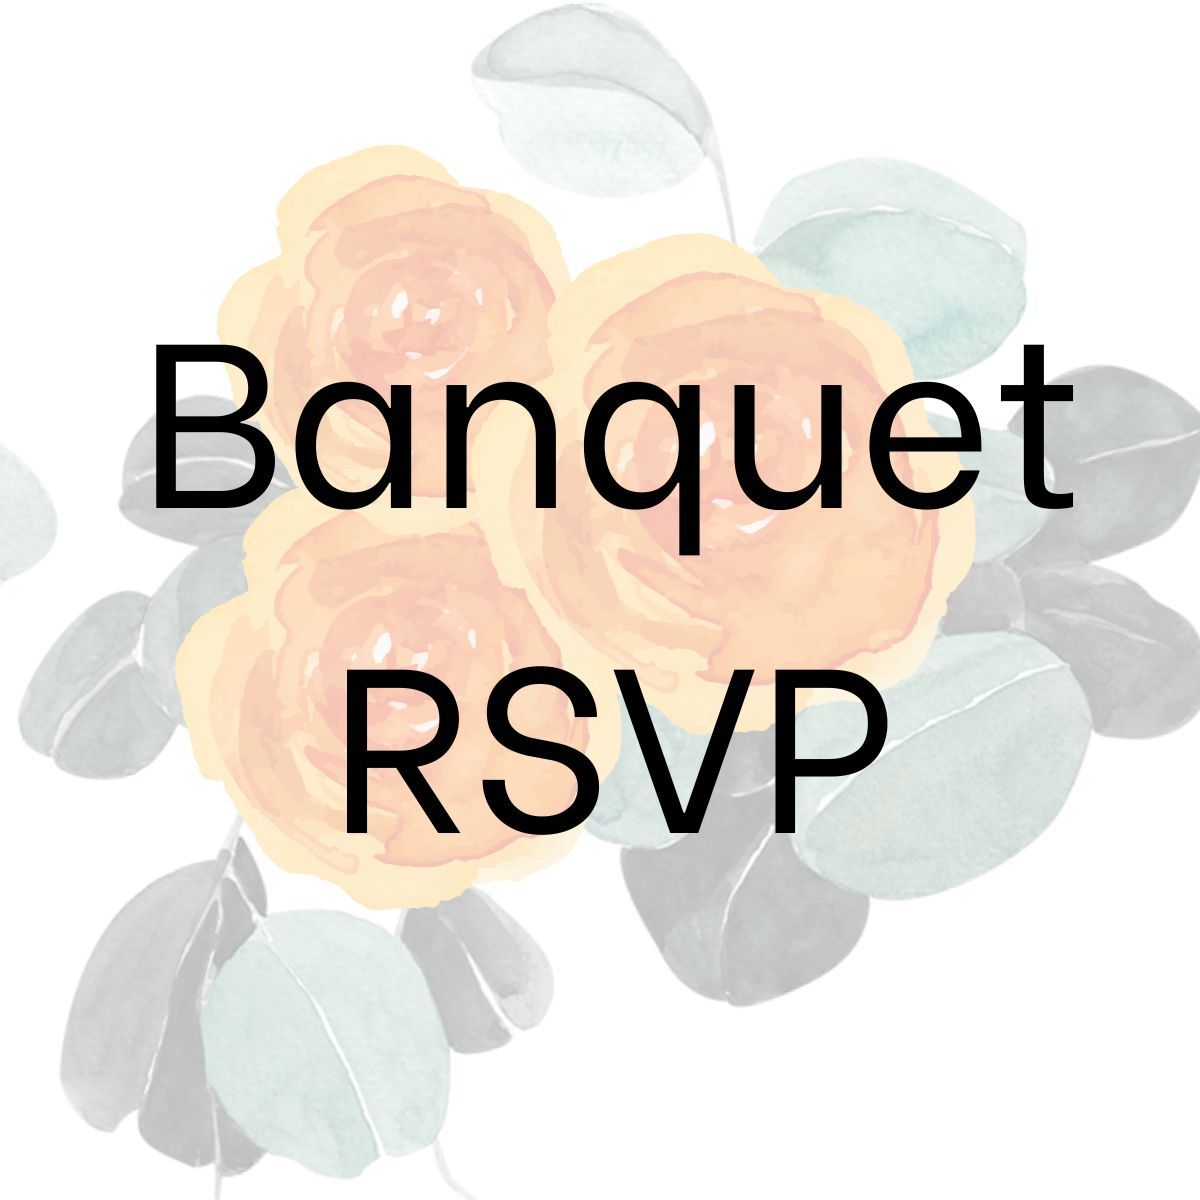 rsvp for the banquet